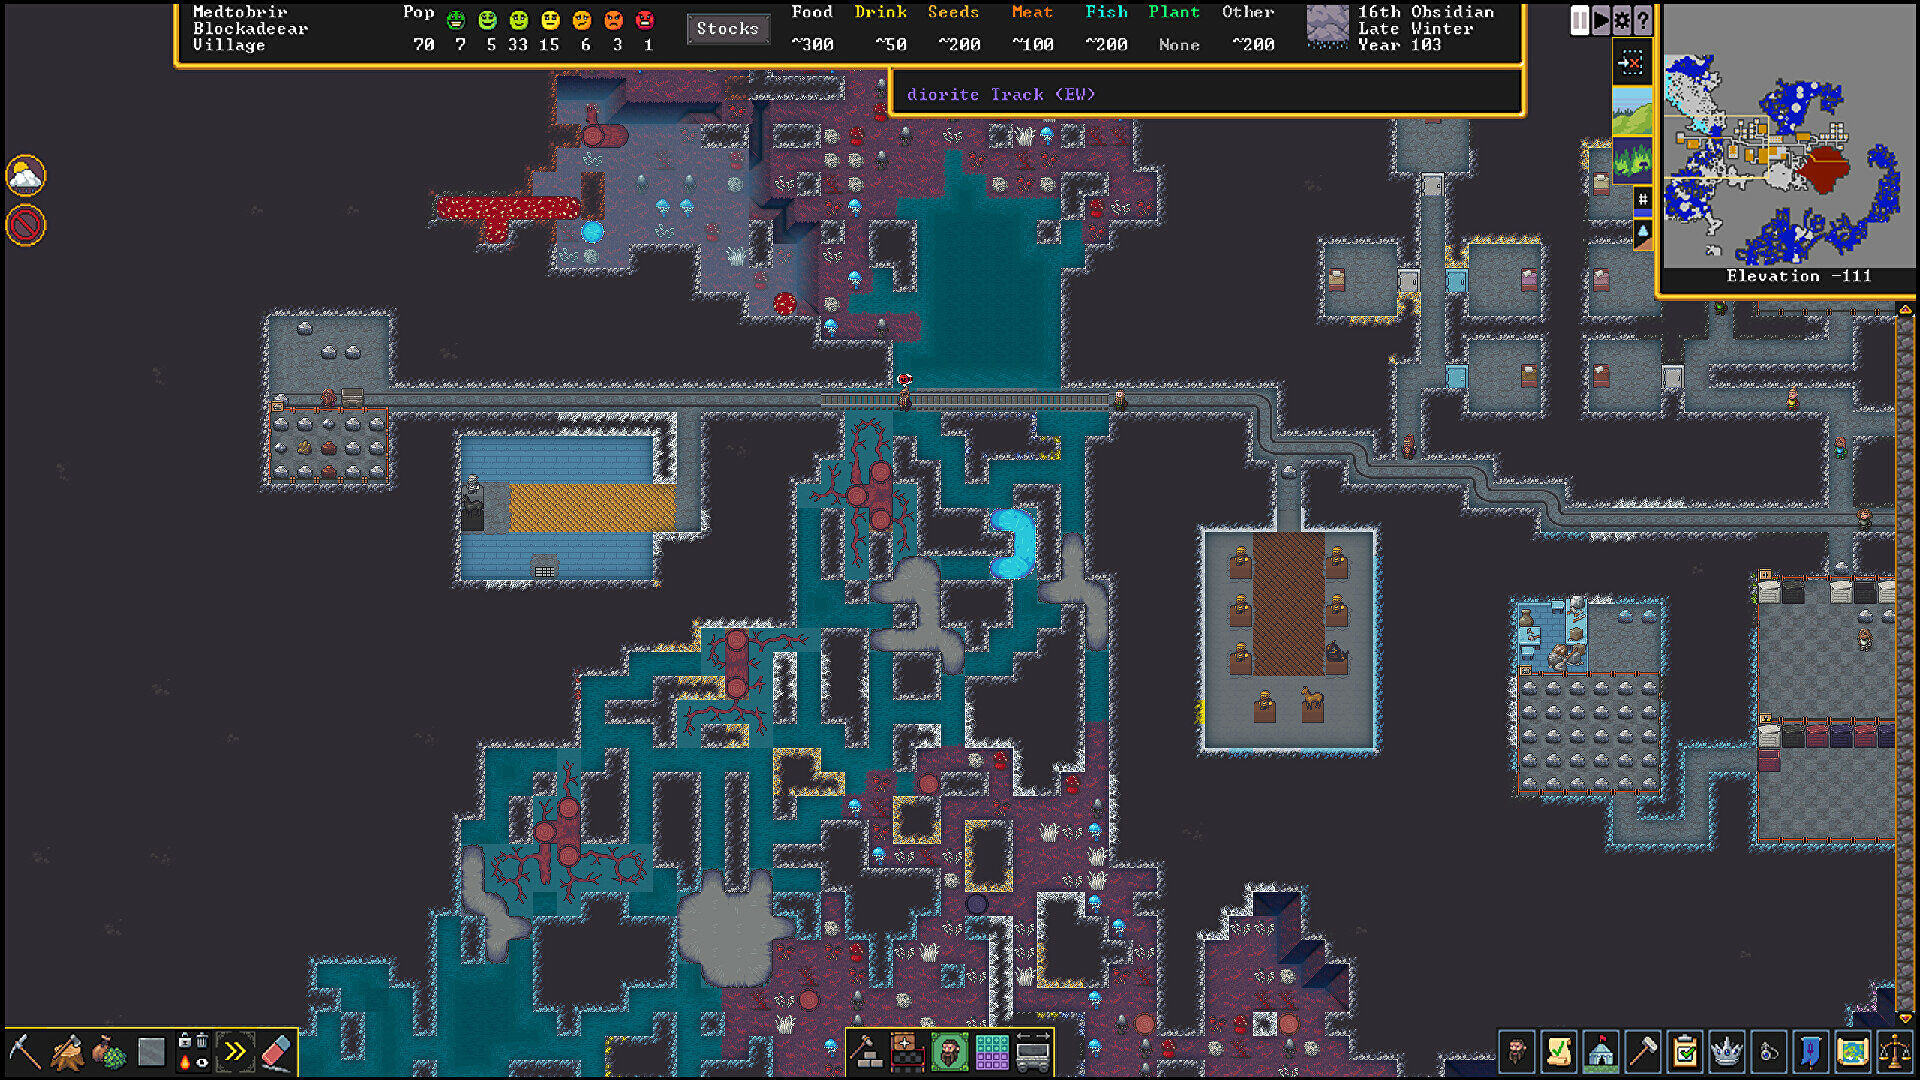 For the first time in history, a non-Adams brother is now working on Dwarf Fortress code